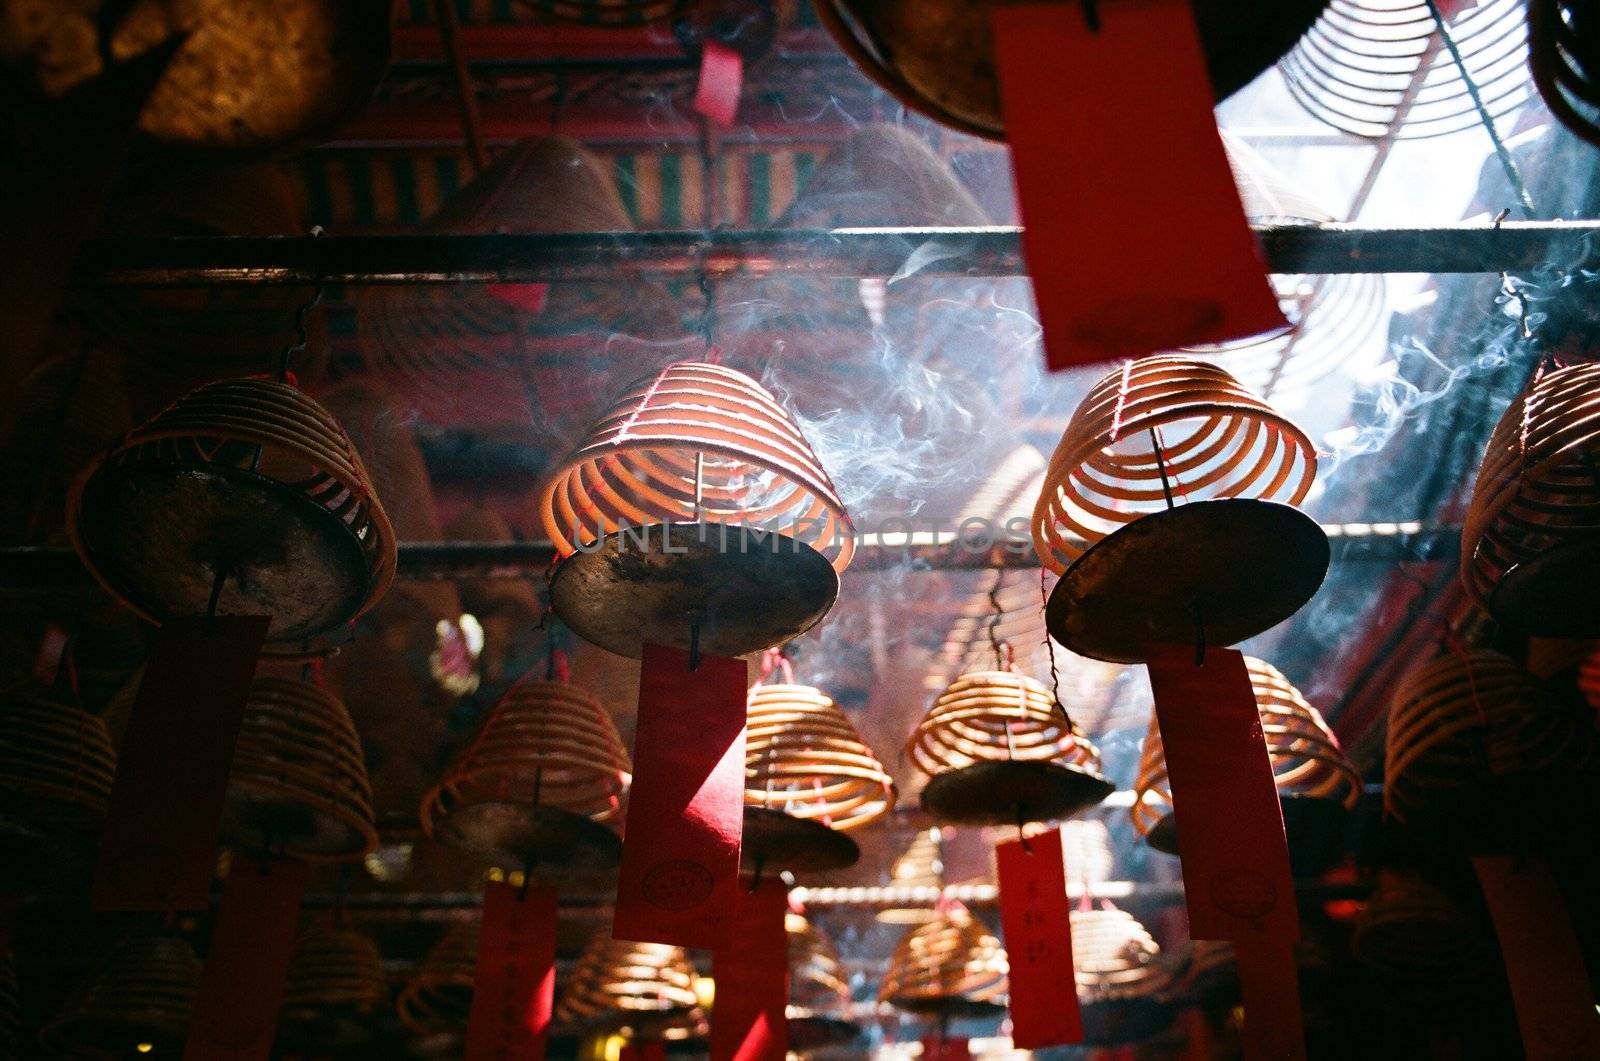 Incense coils that is found in chinese temple at many asia countries, pictures are taken in Hong Kong